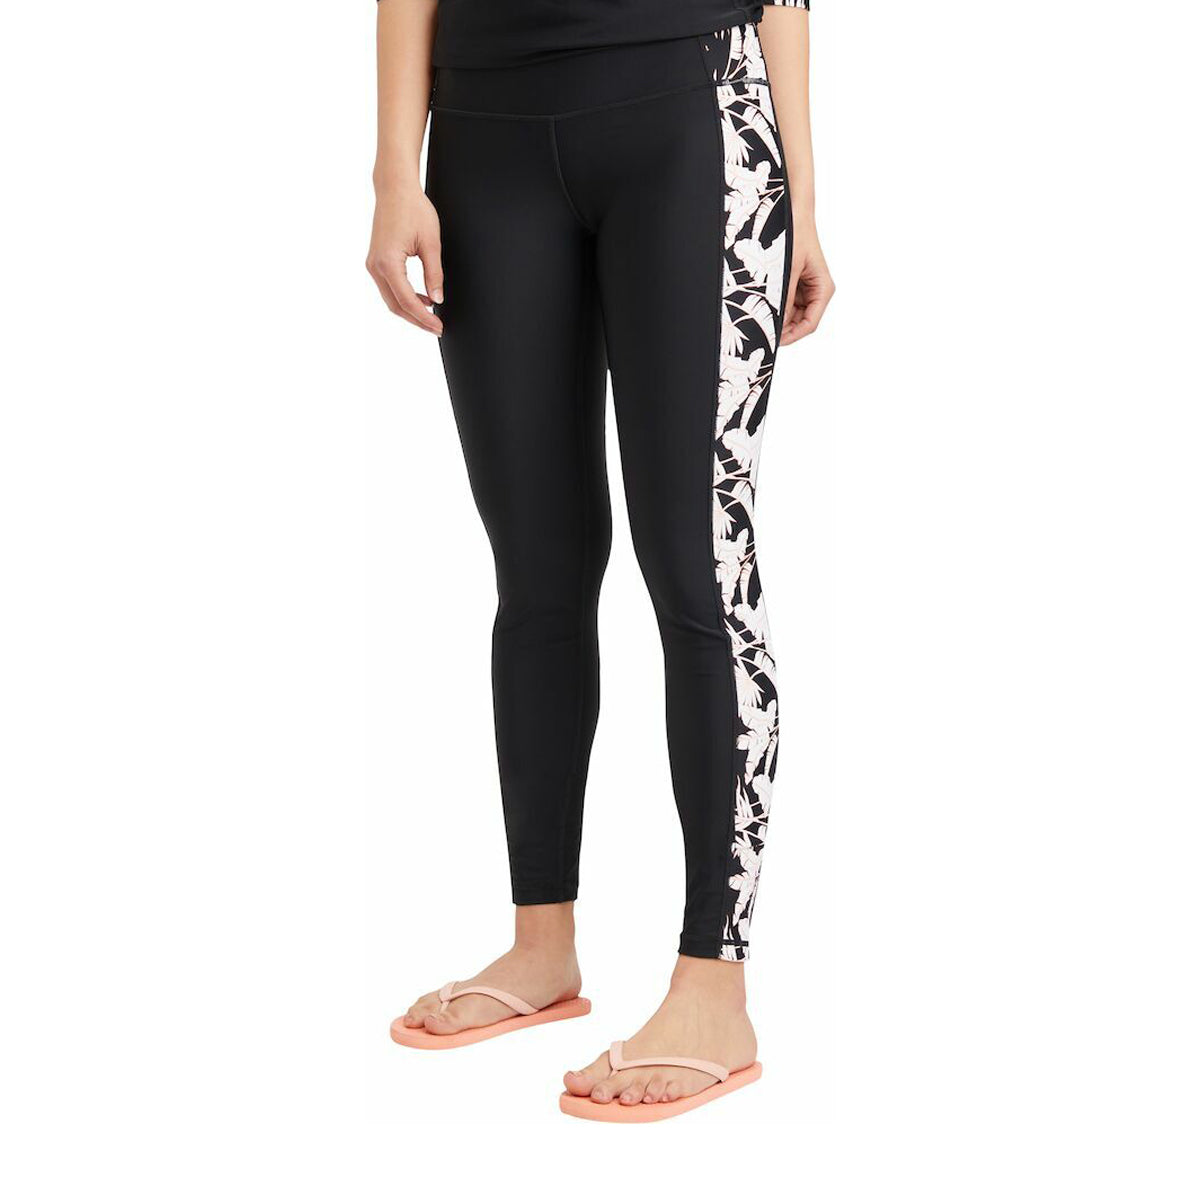 Women's Leggings and Pants - Paddle Offers